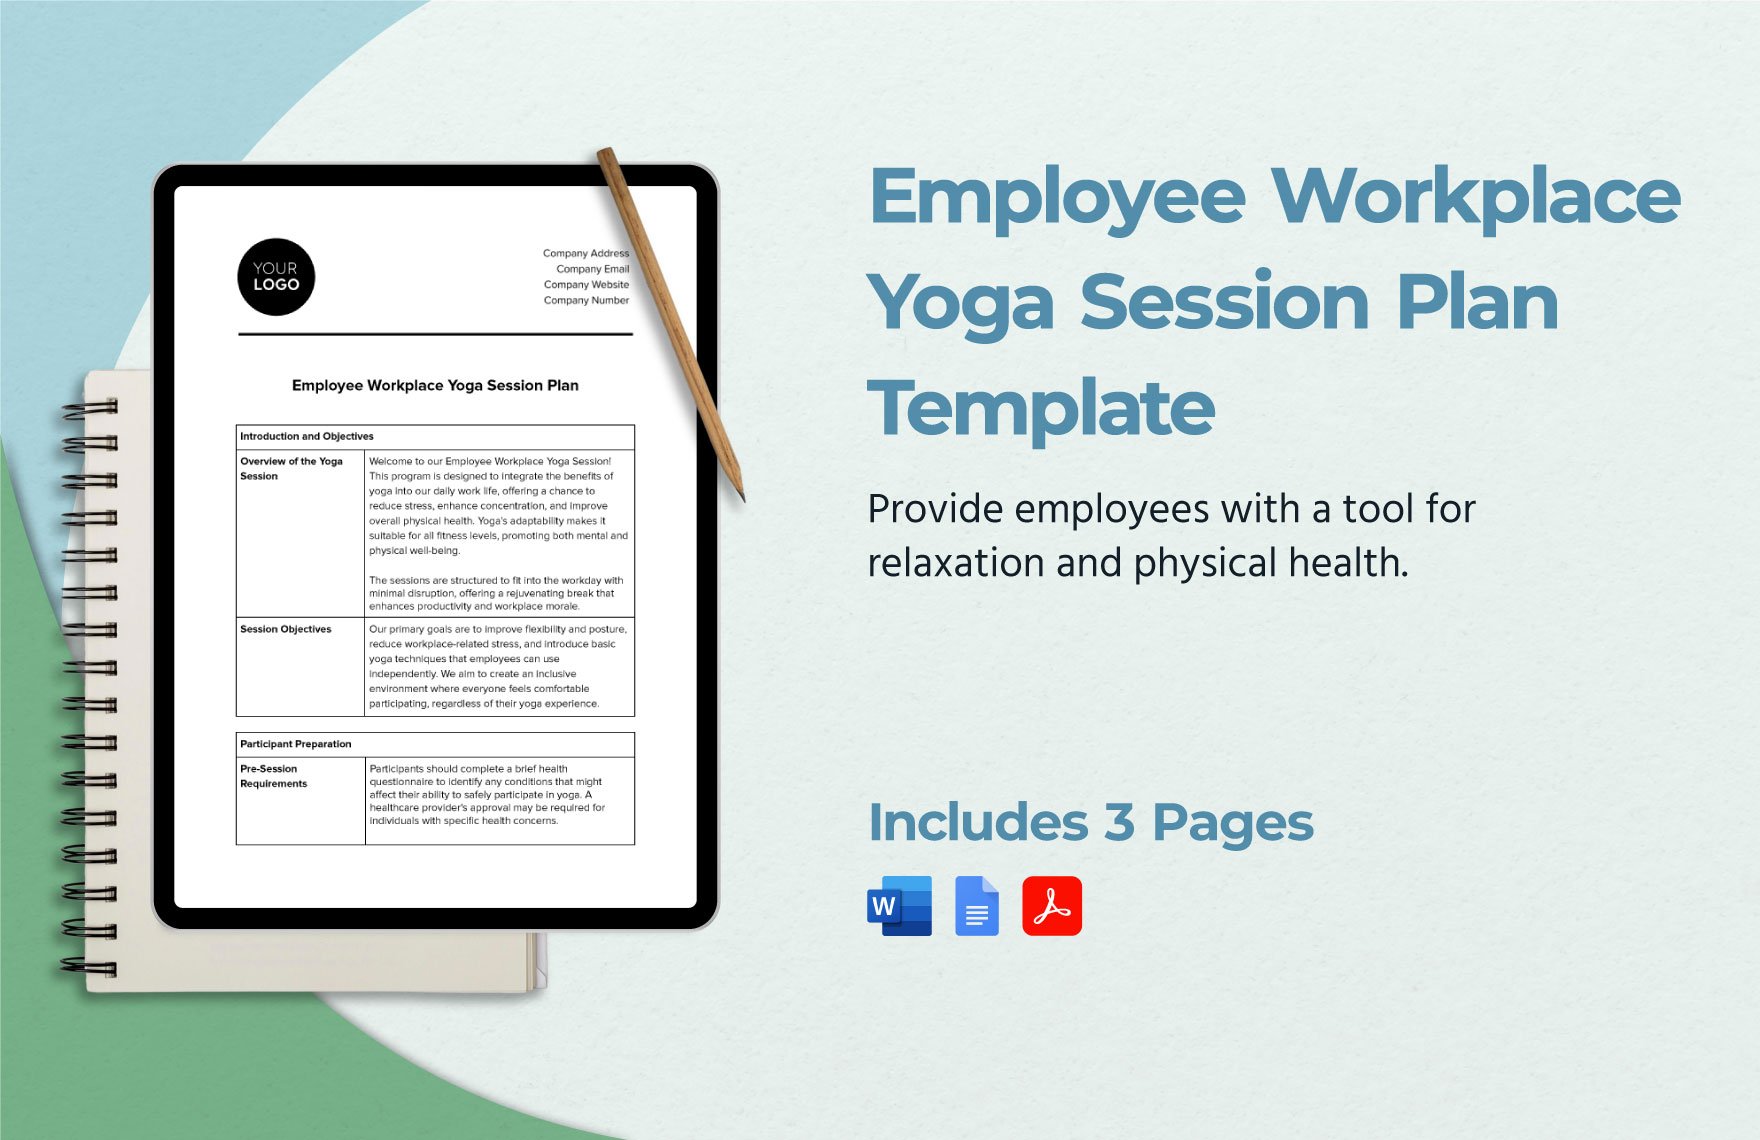 Employee Workplace Yoga Session Plan Template